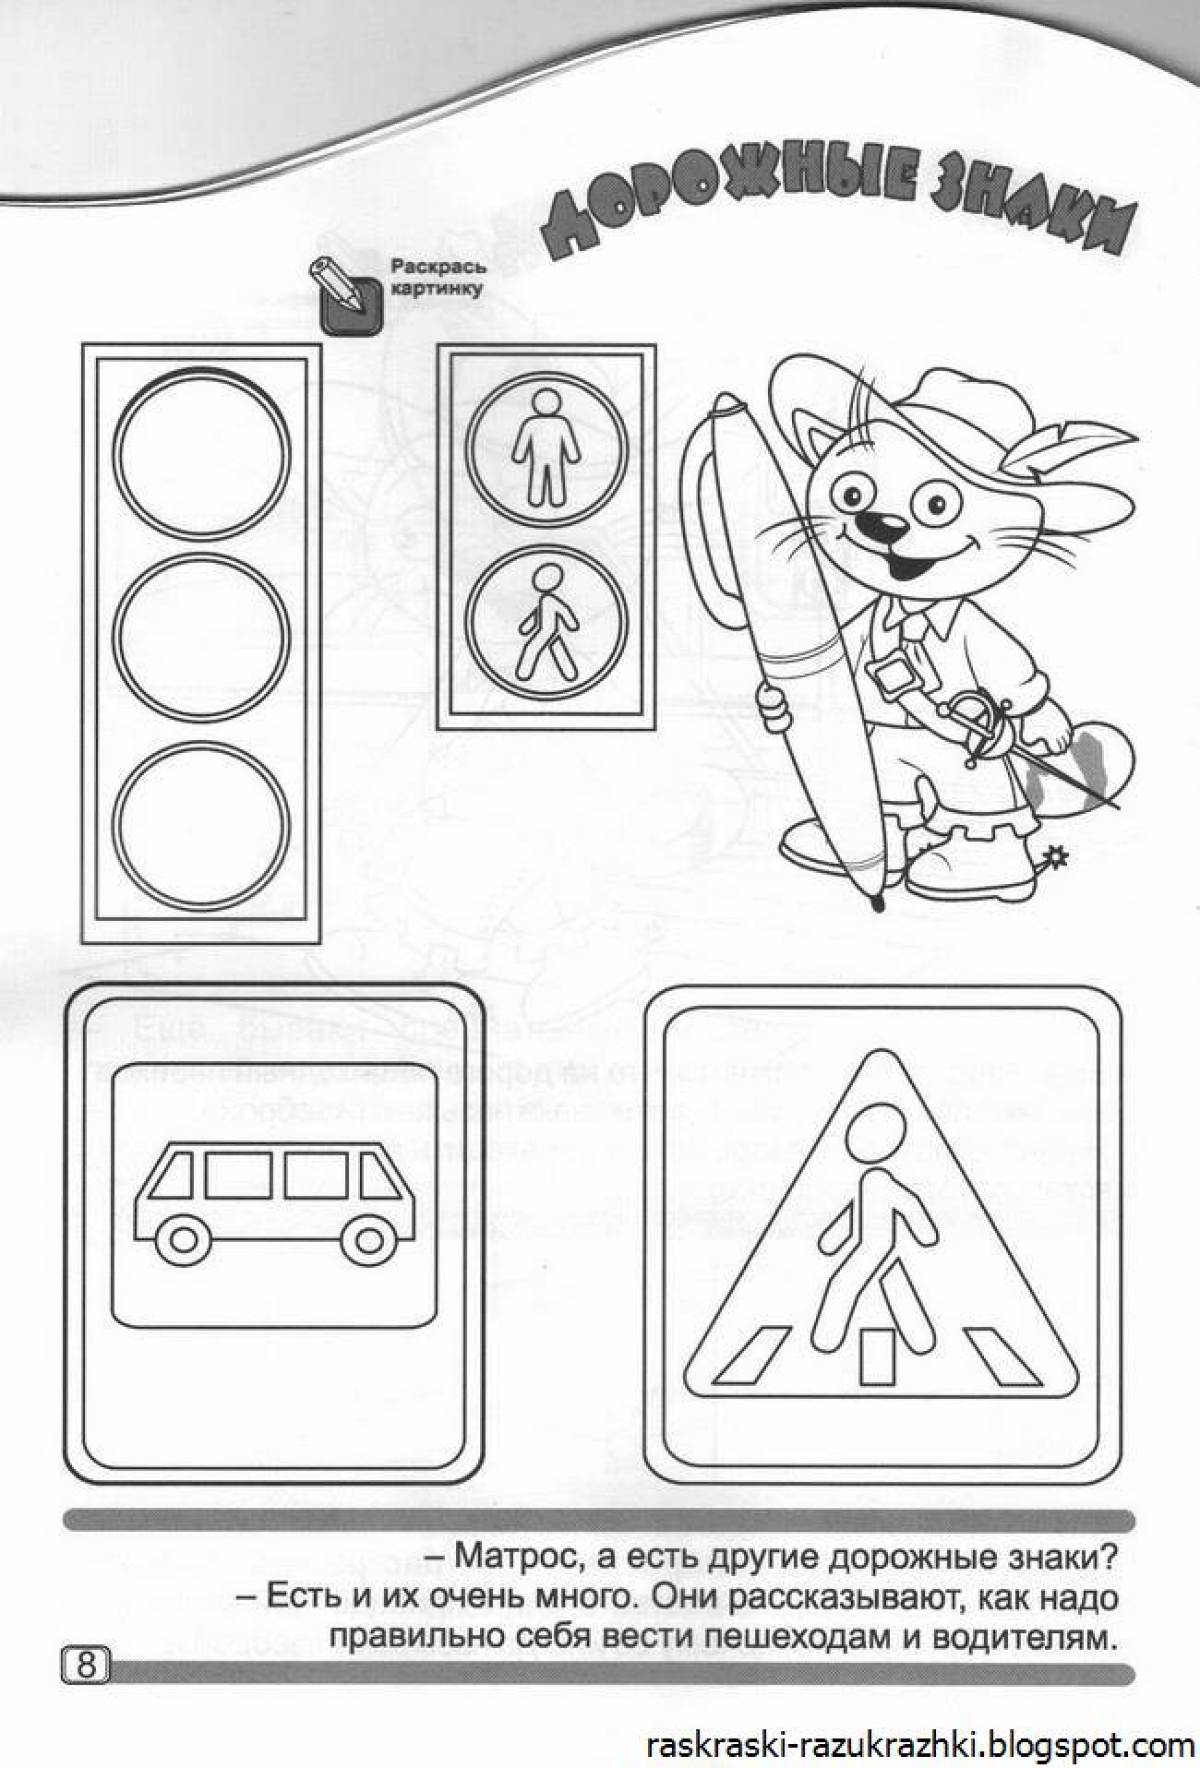 Vibrant traffic rules coloring pages for preschoolers